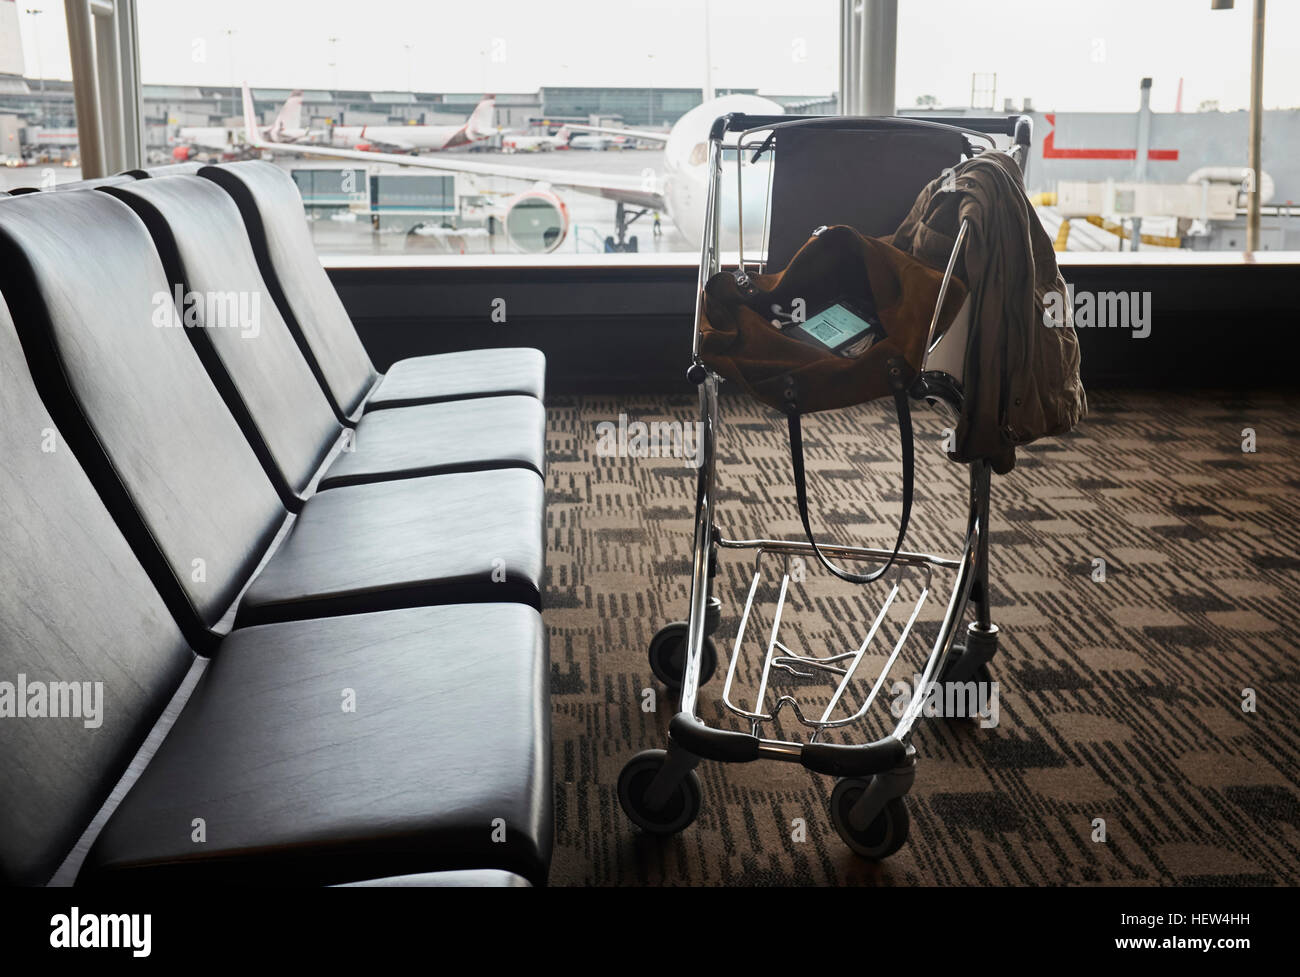 Smartphone in shoulder bag in luggage trolley in airport lounge Stock Photo